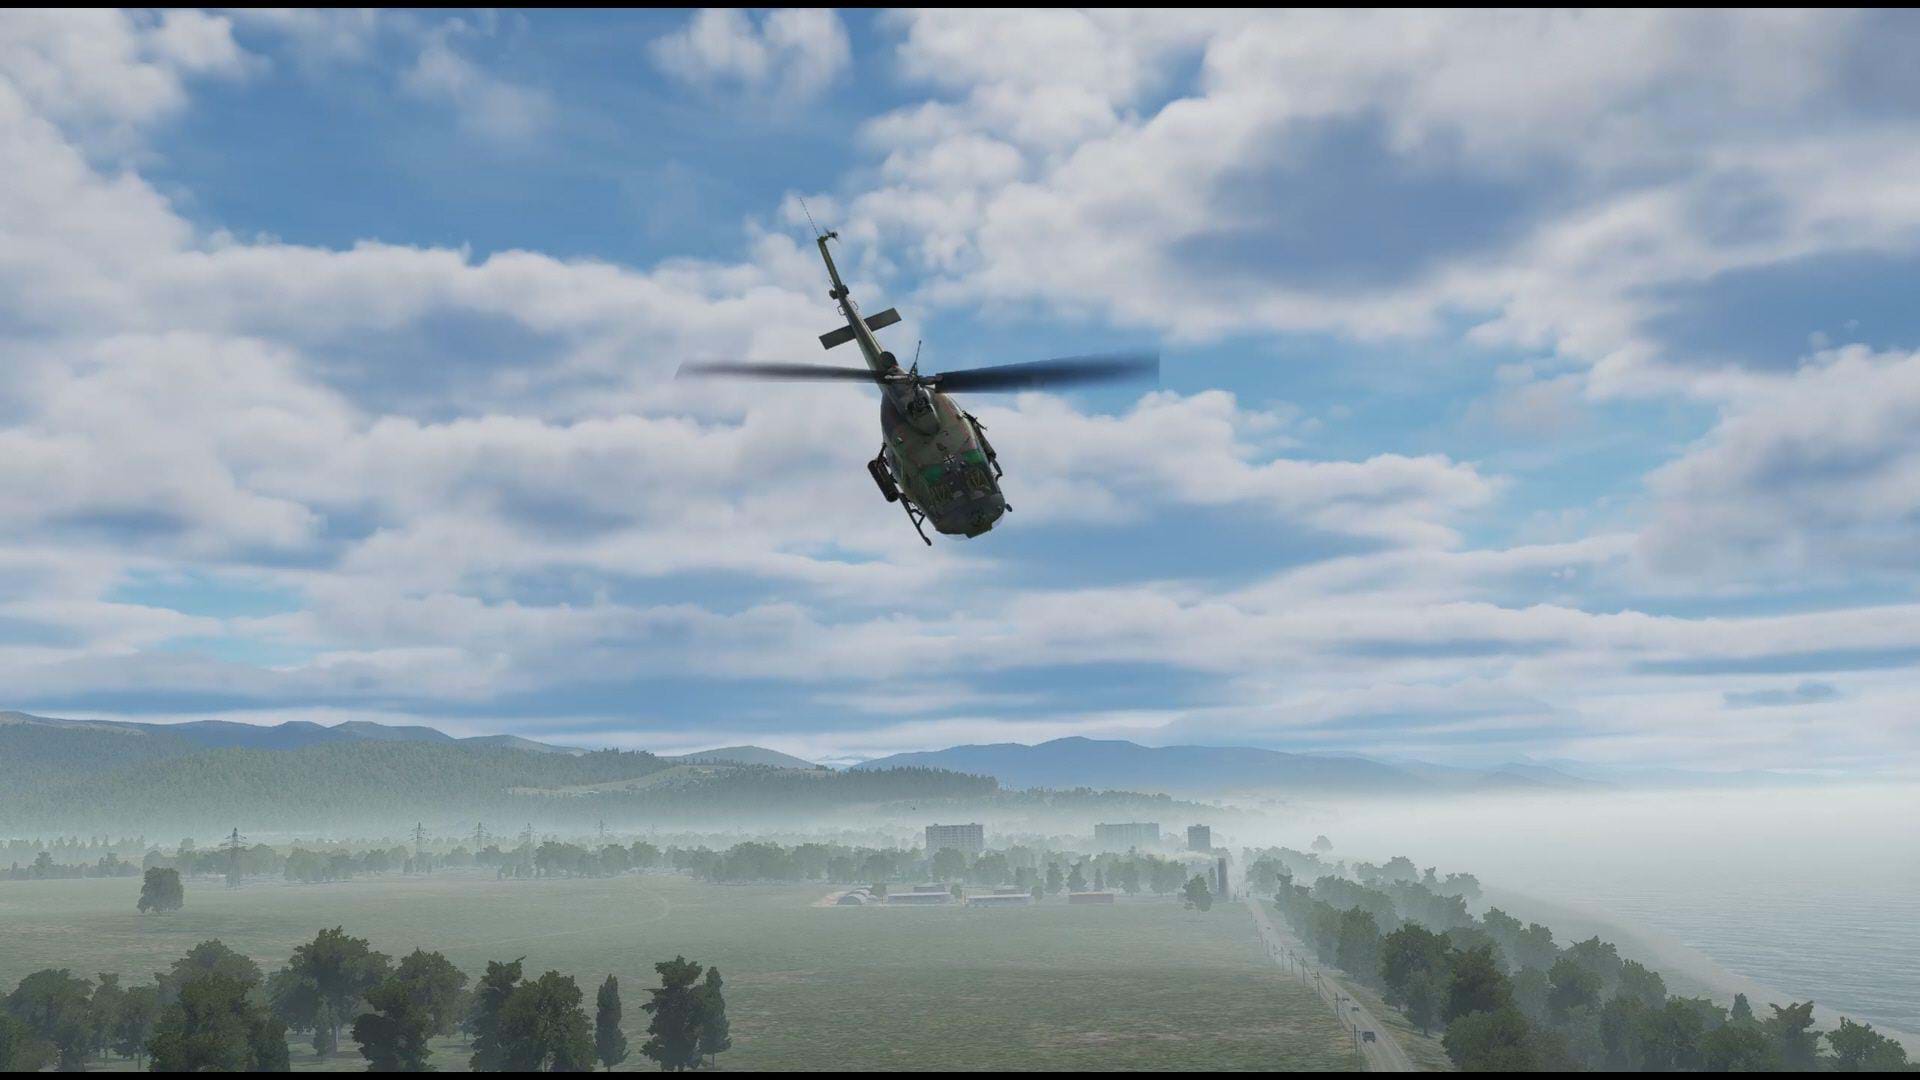 Low Level Heaven releases second DCS Worlds Apart: Storm Front video